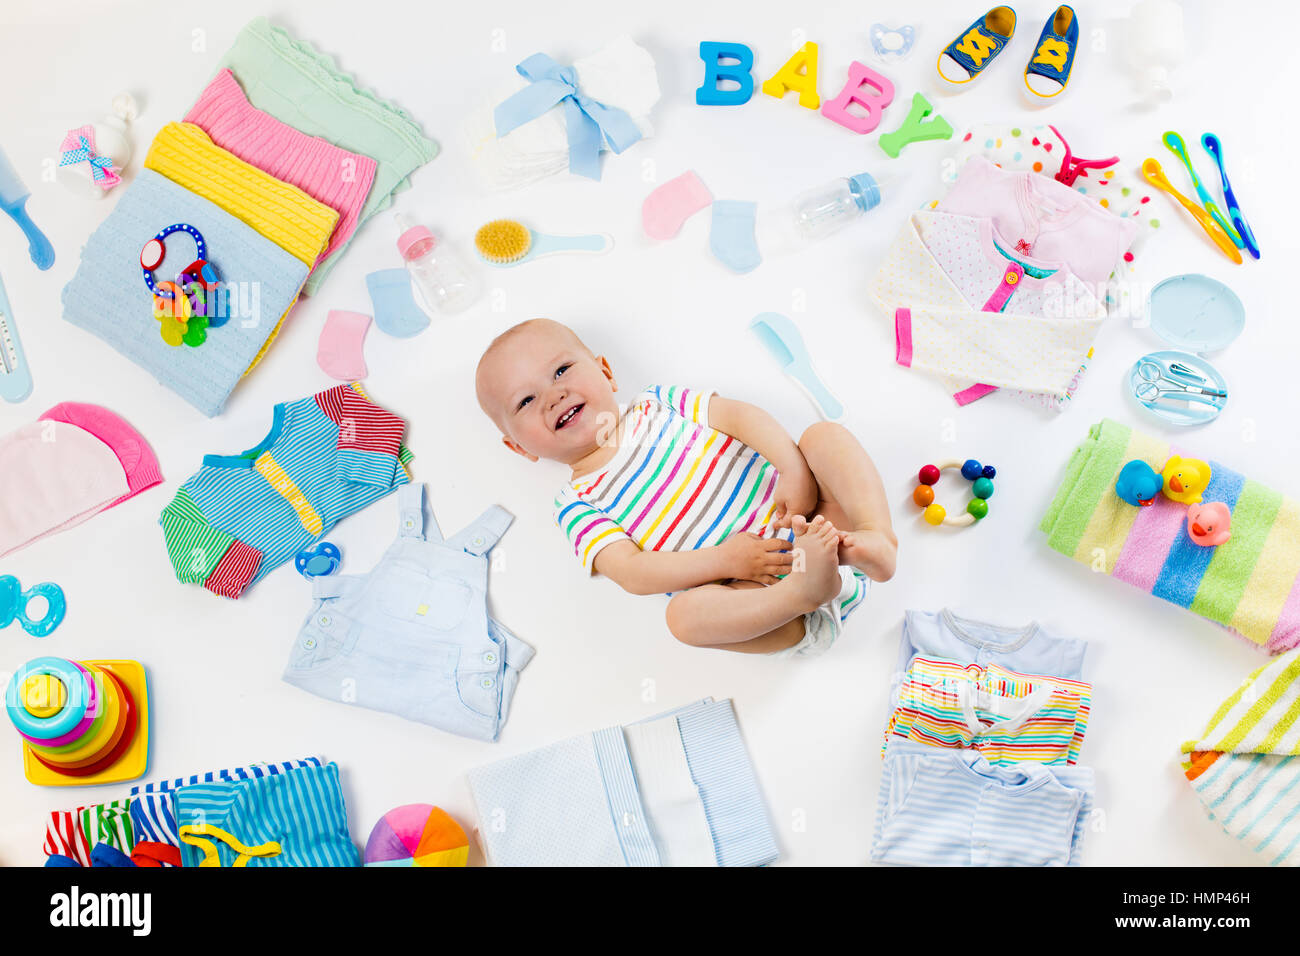 Baby on white background with clothing, toiletries, toys and health ...